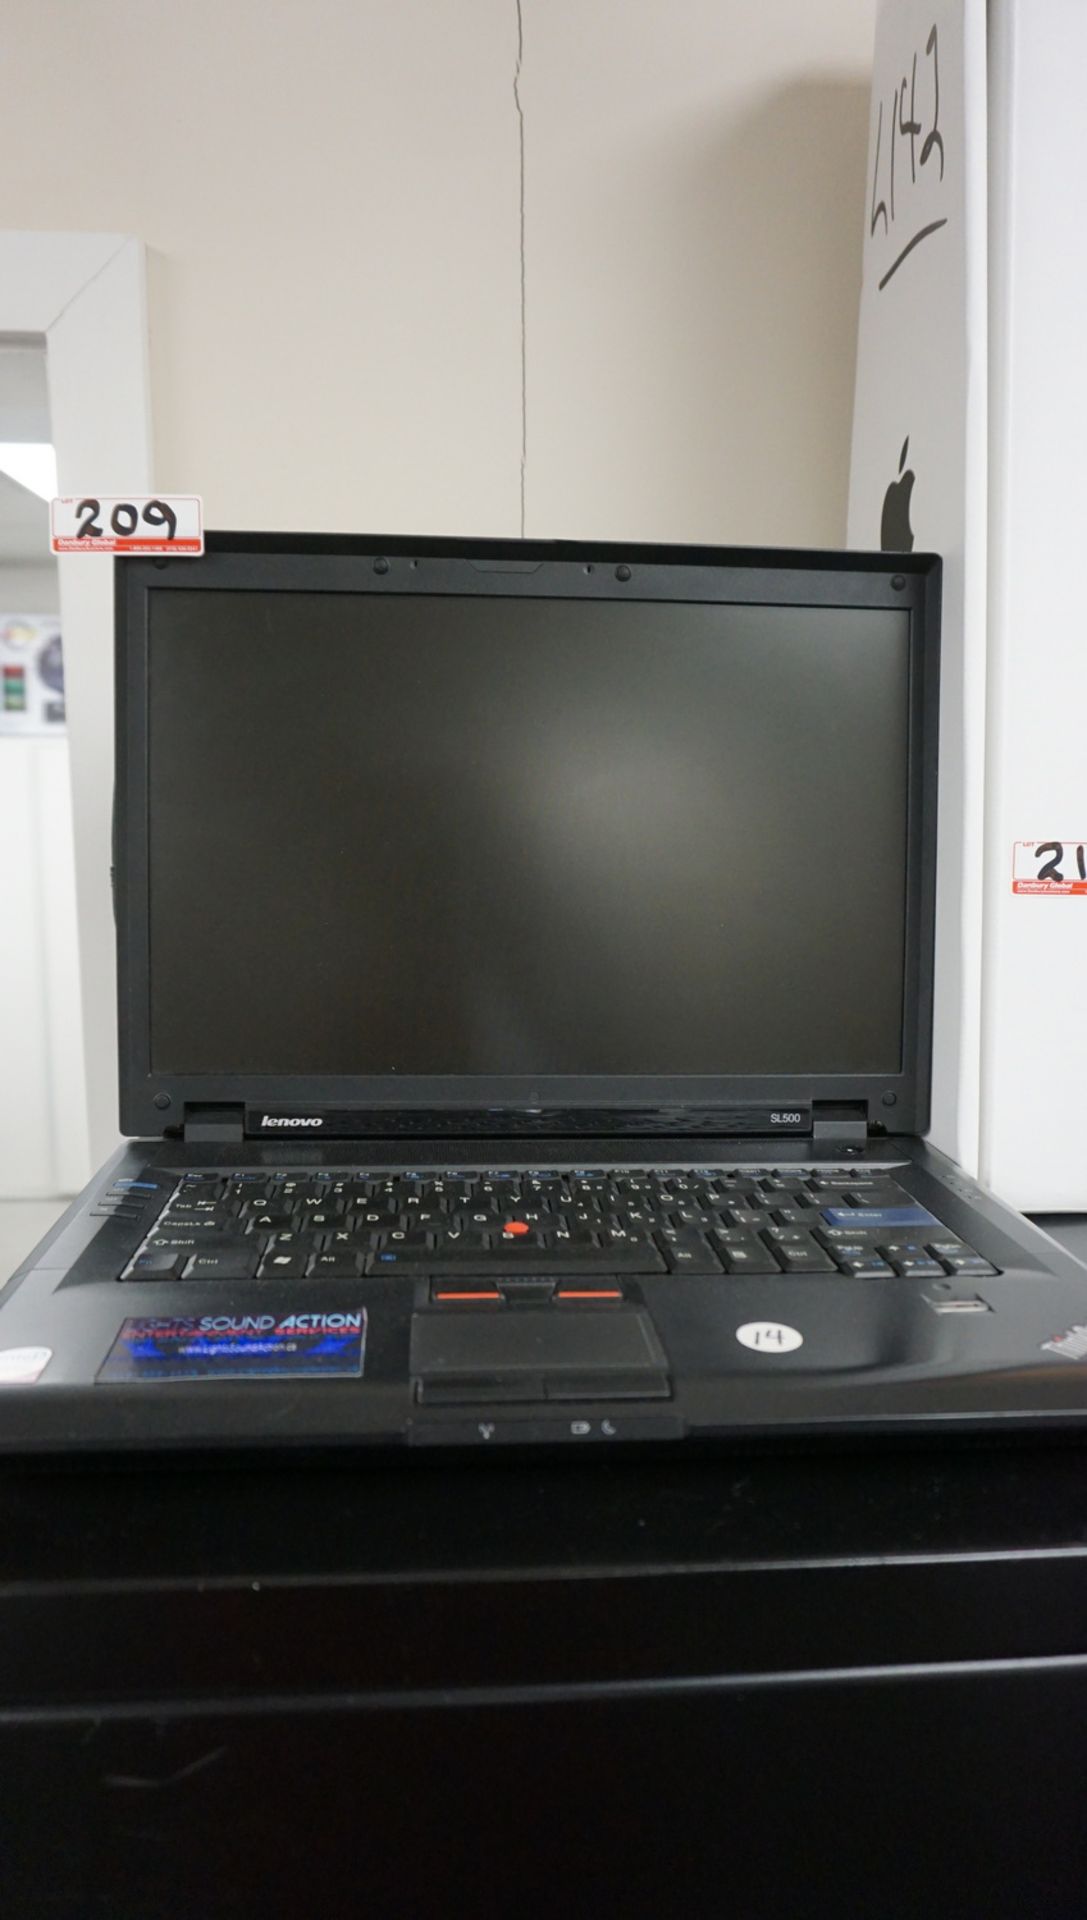 LENOVO SL500 LAPTOP W/ INTEL CORE 2 DUO 2.4GHZ CPU, 3GB RAM C/W VIDEO SPECIAL EFFECTS CLIPS